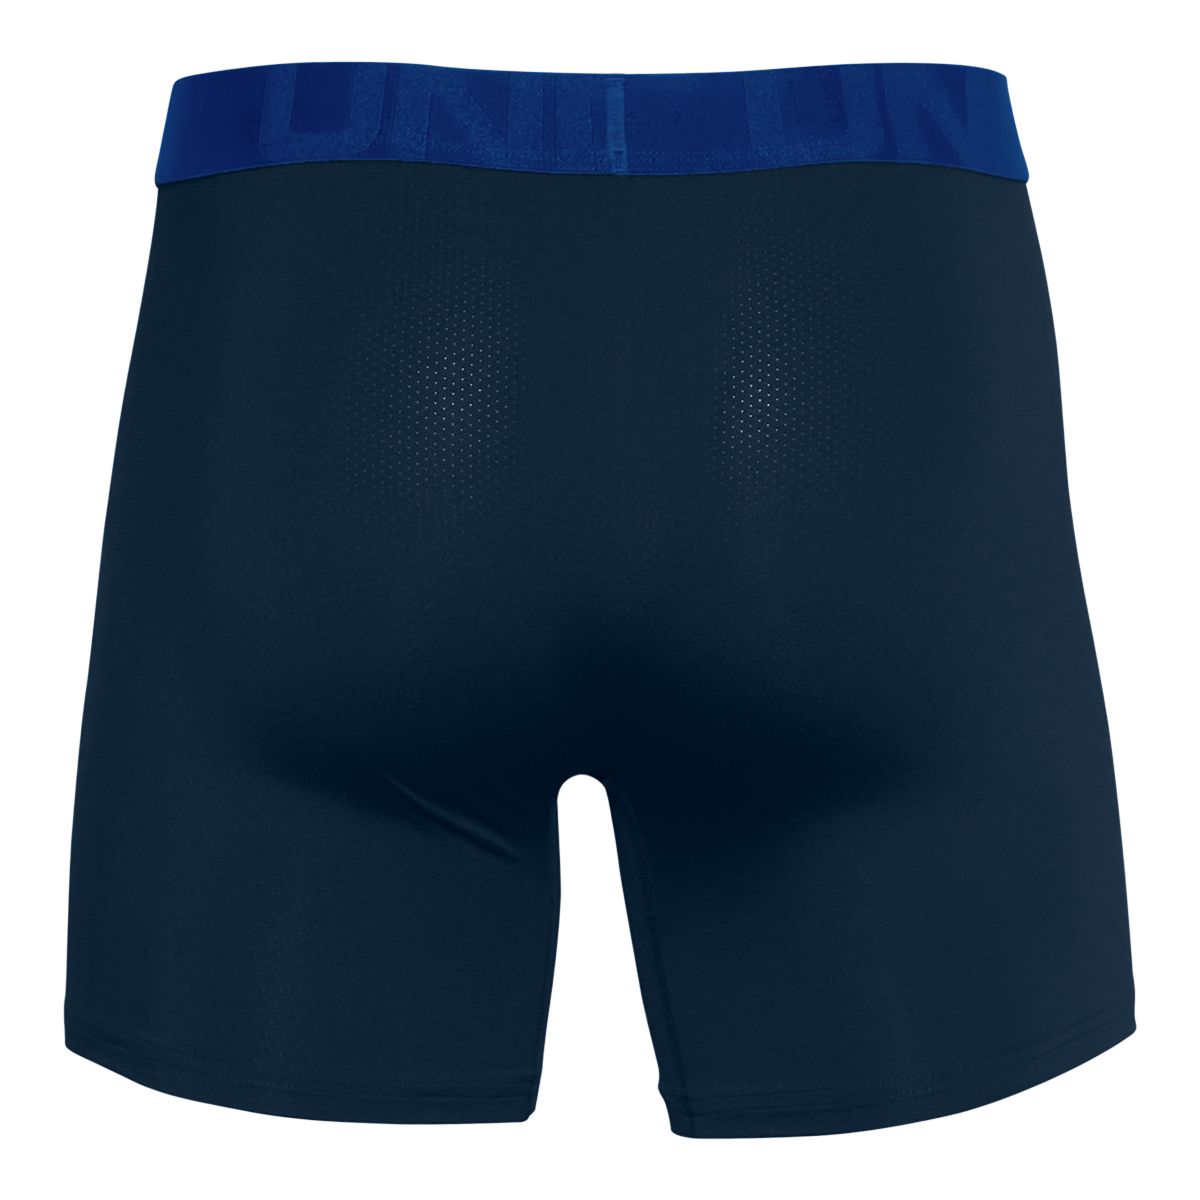 Under Armour Mens Tech 6 Boxerjock 2 Pack (Royal/Academy), Mens Underwear, Mens Clothing Brands, Mens Clothing